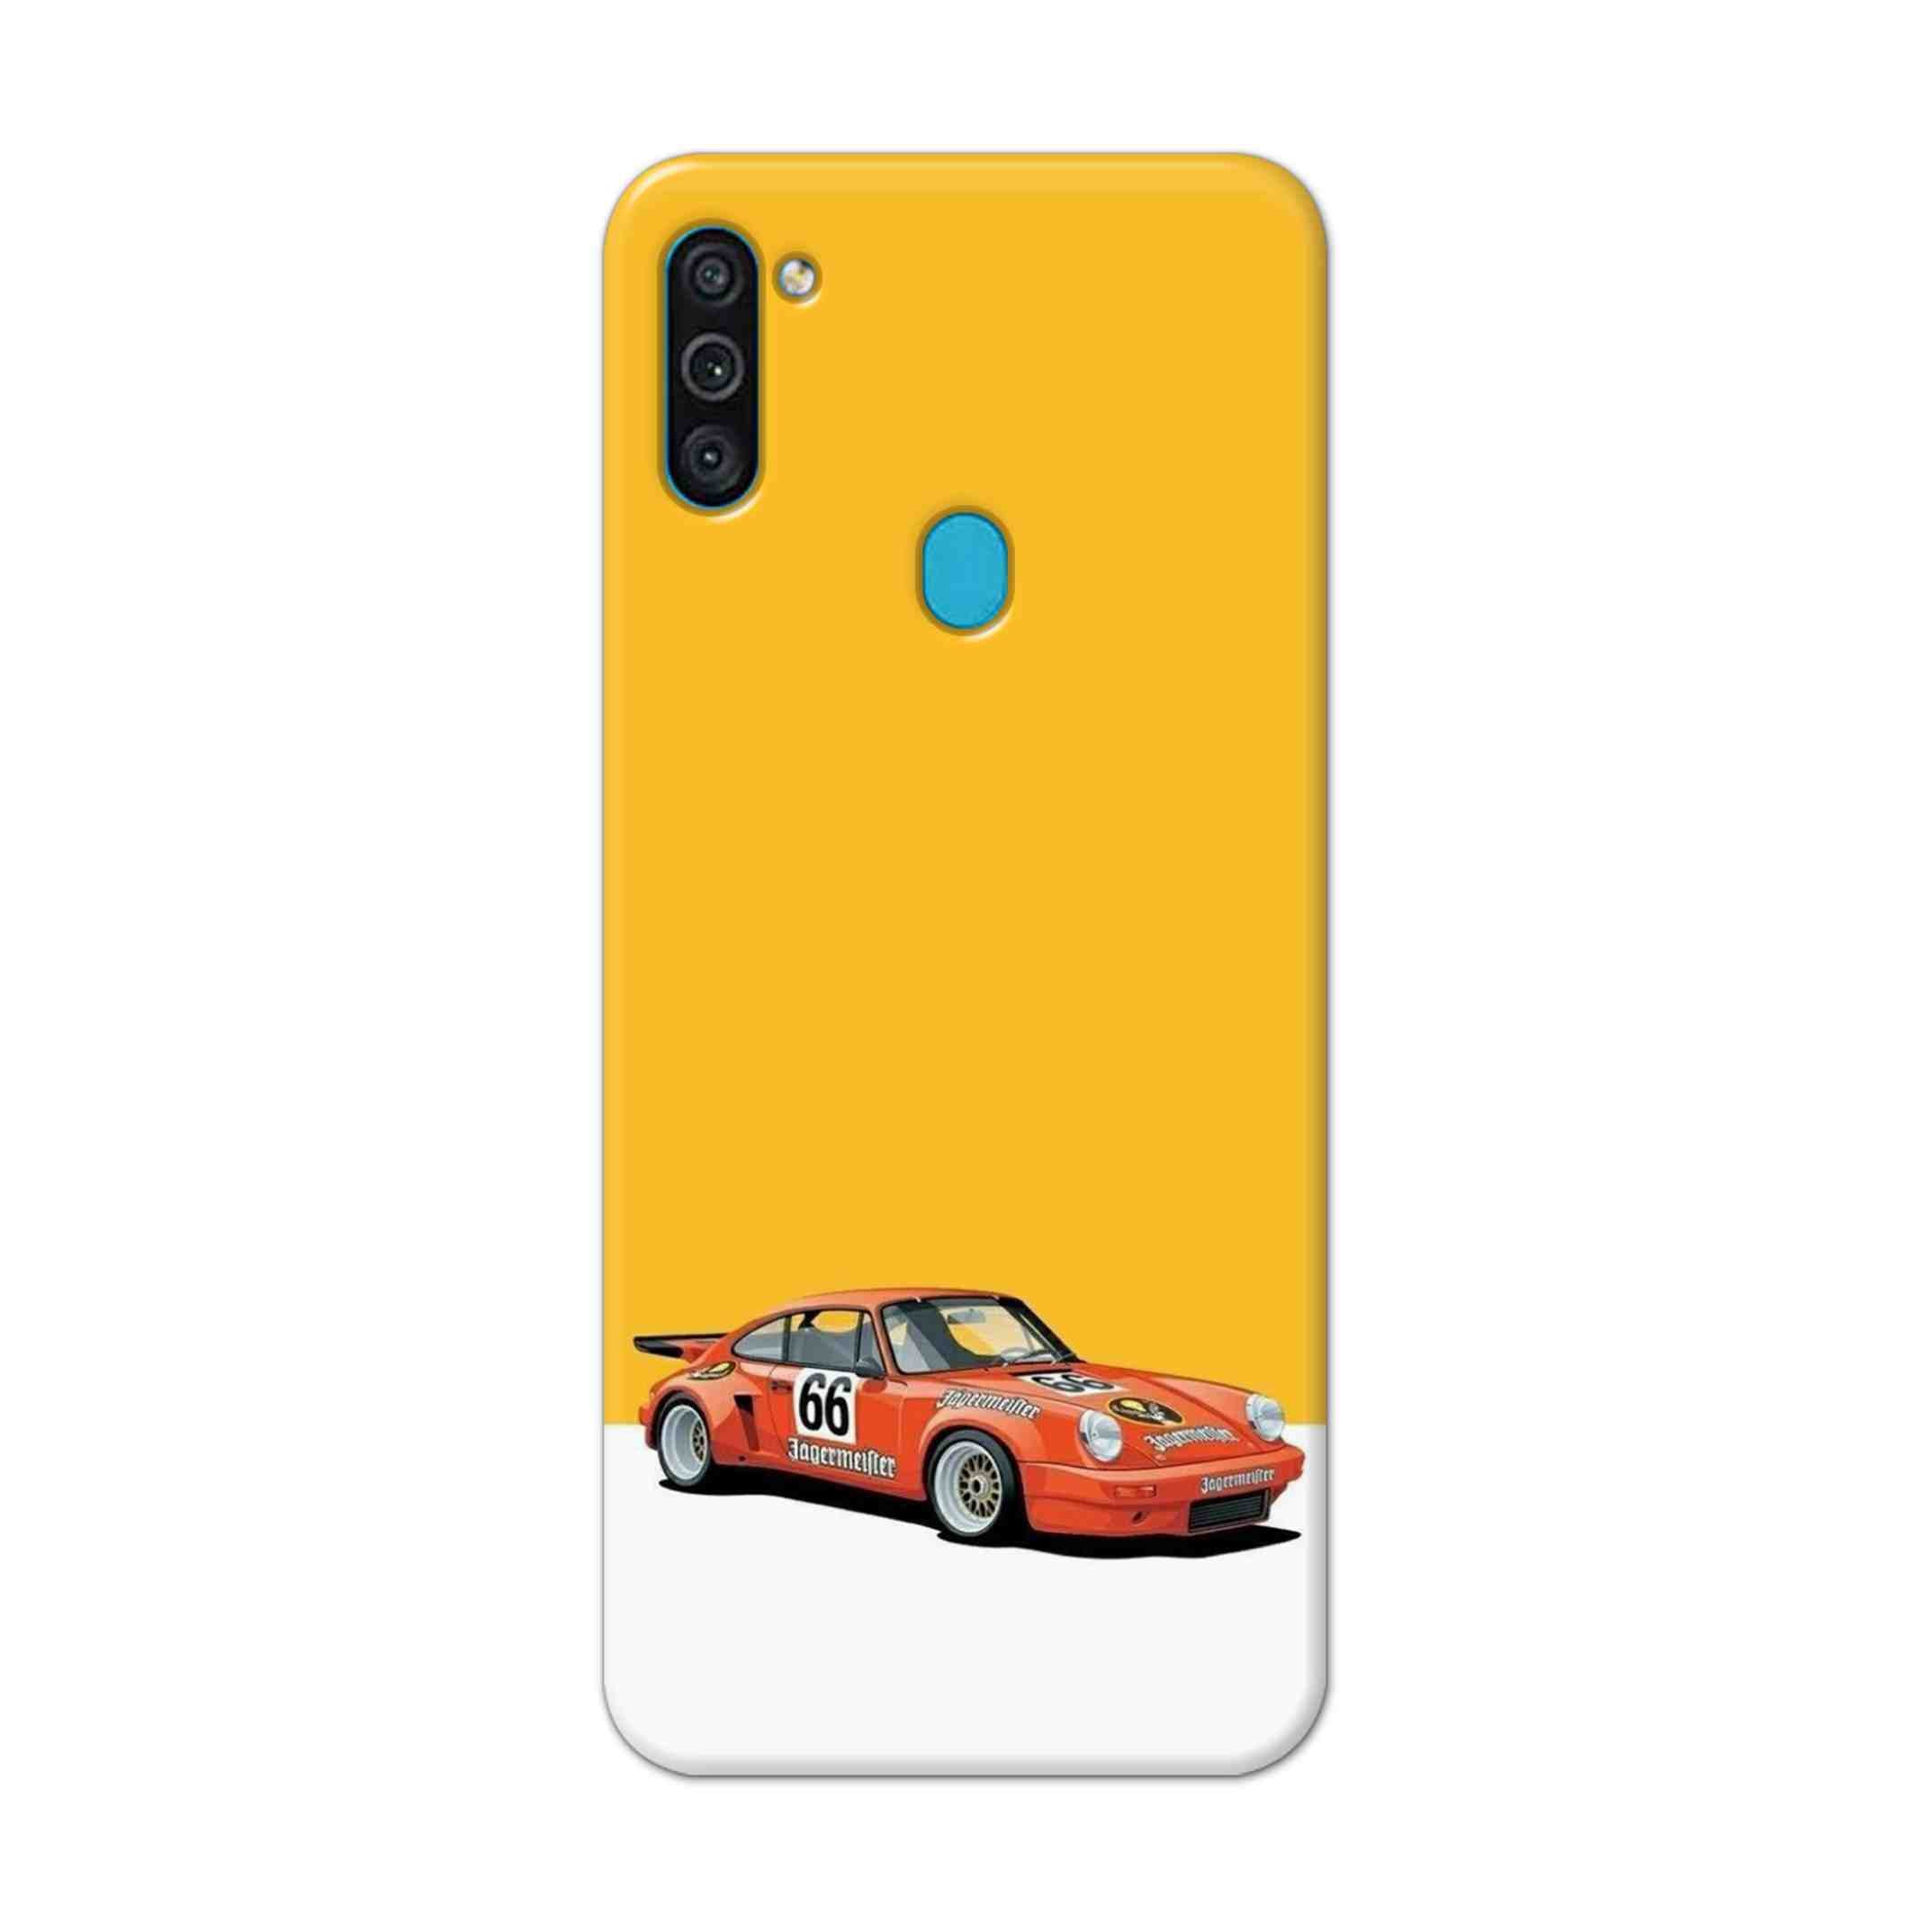 Buy Porche Hard Back Mobile Phone Case Cover For Samsung Galaxy M11 Online